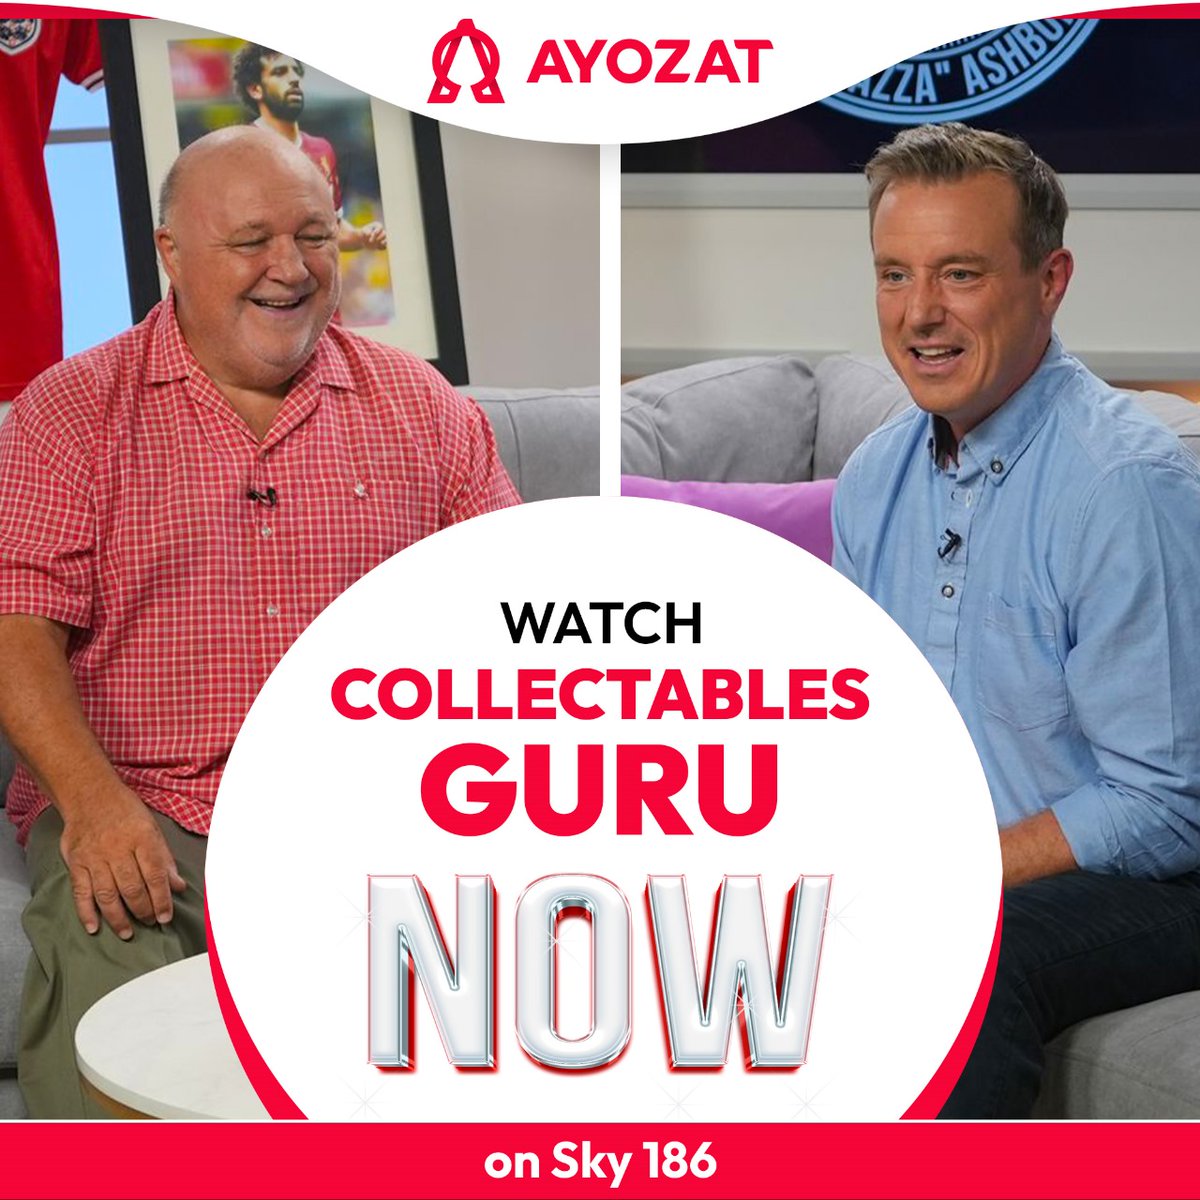 Calling all collectors! Tune in NOW to Sky channel 186 for Collectables Guru. Whether you're a seasoned collector or just starting out, join us and unlock the secrets of collecting! #Collectables #vintage @CollectablesGu